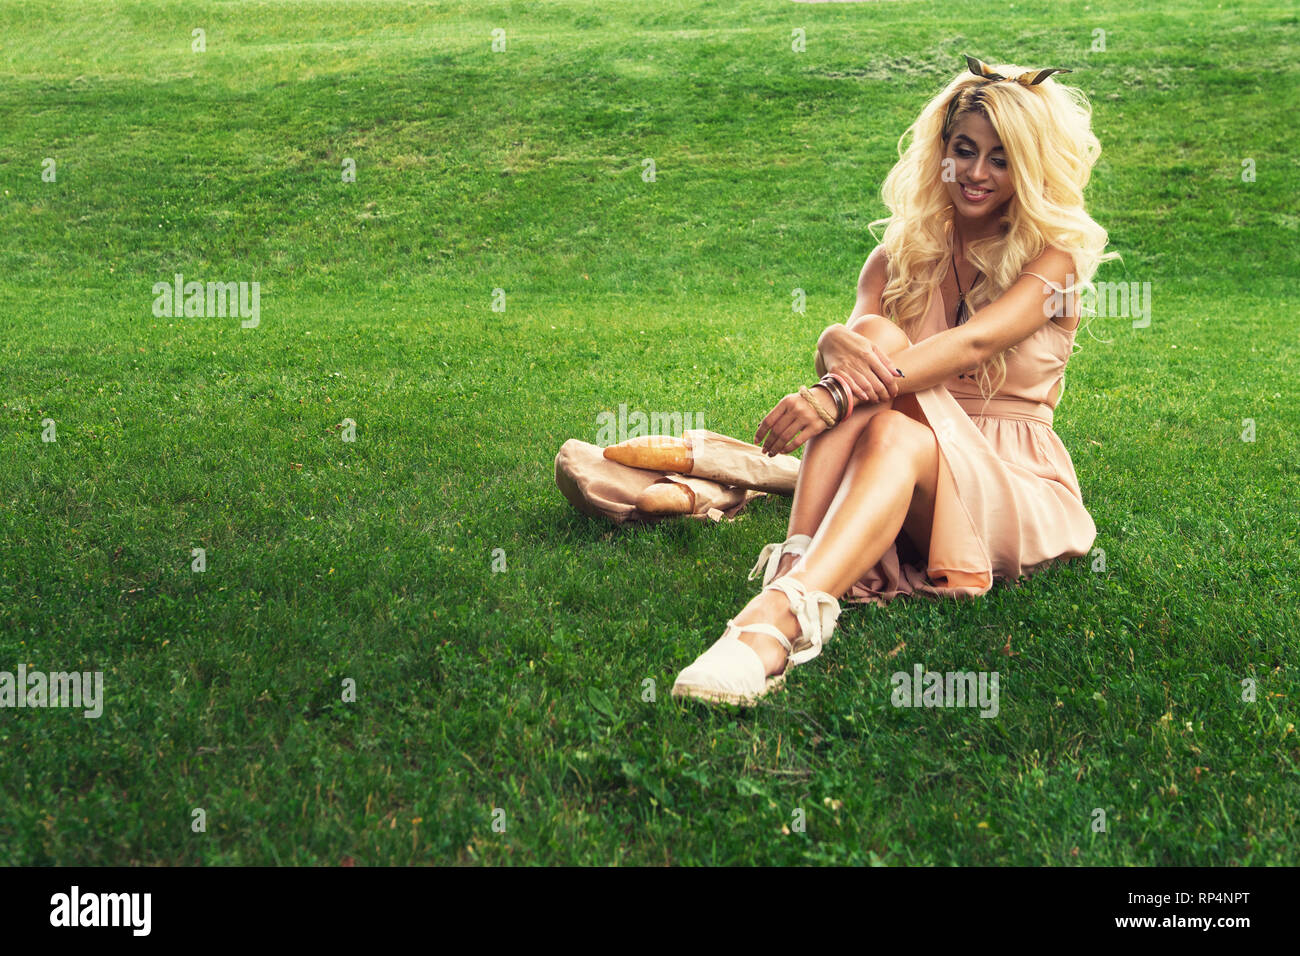 eauty blonde alone young woman resting in the park Stock Photo